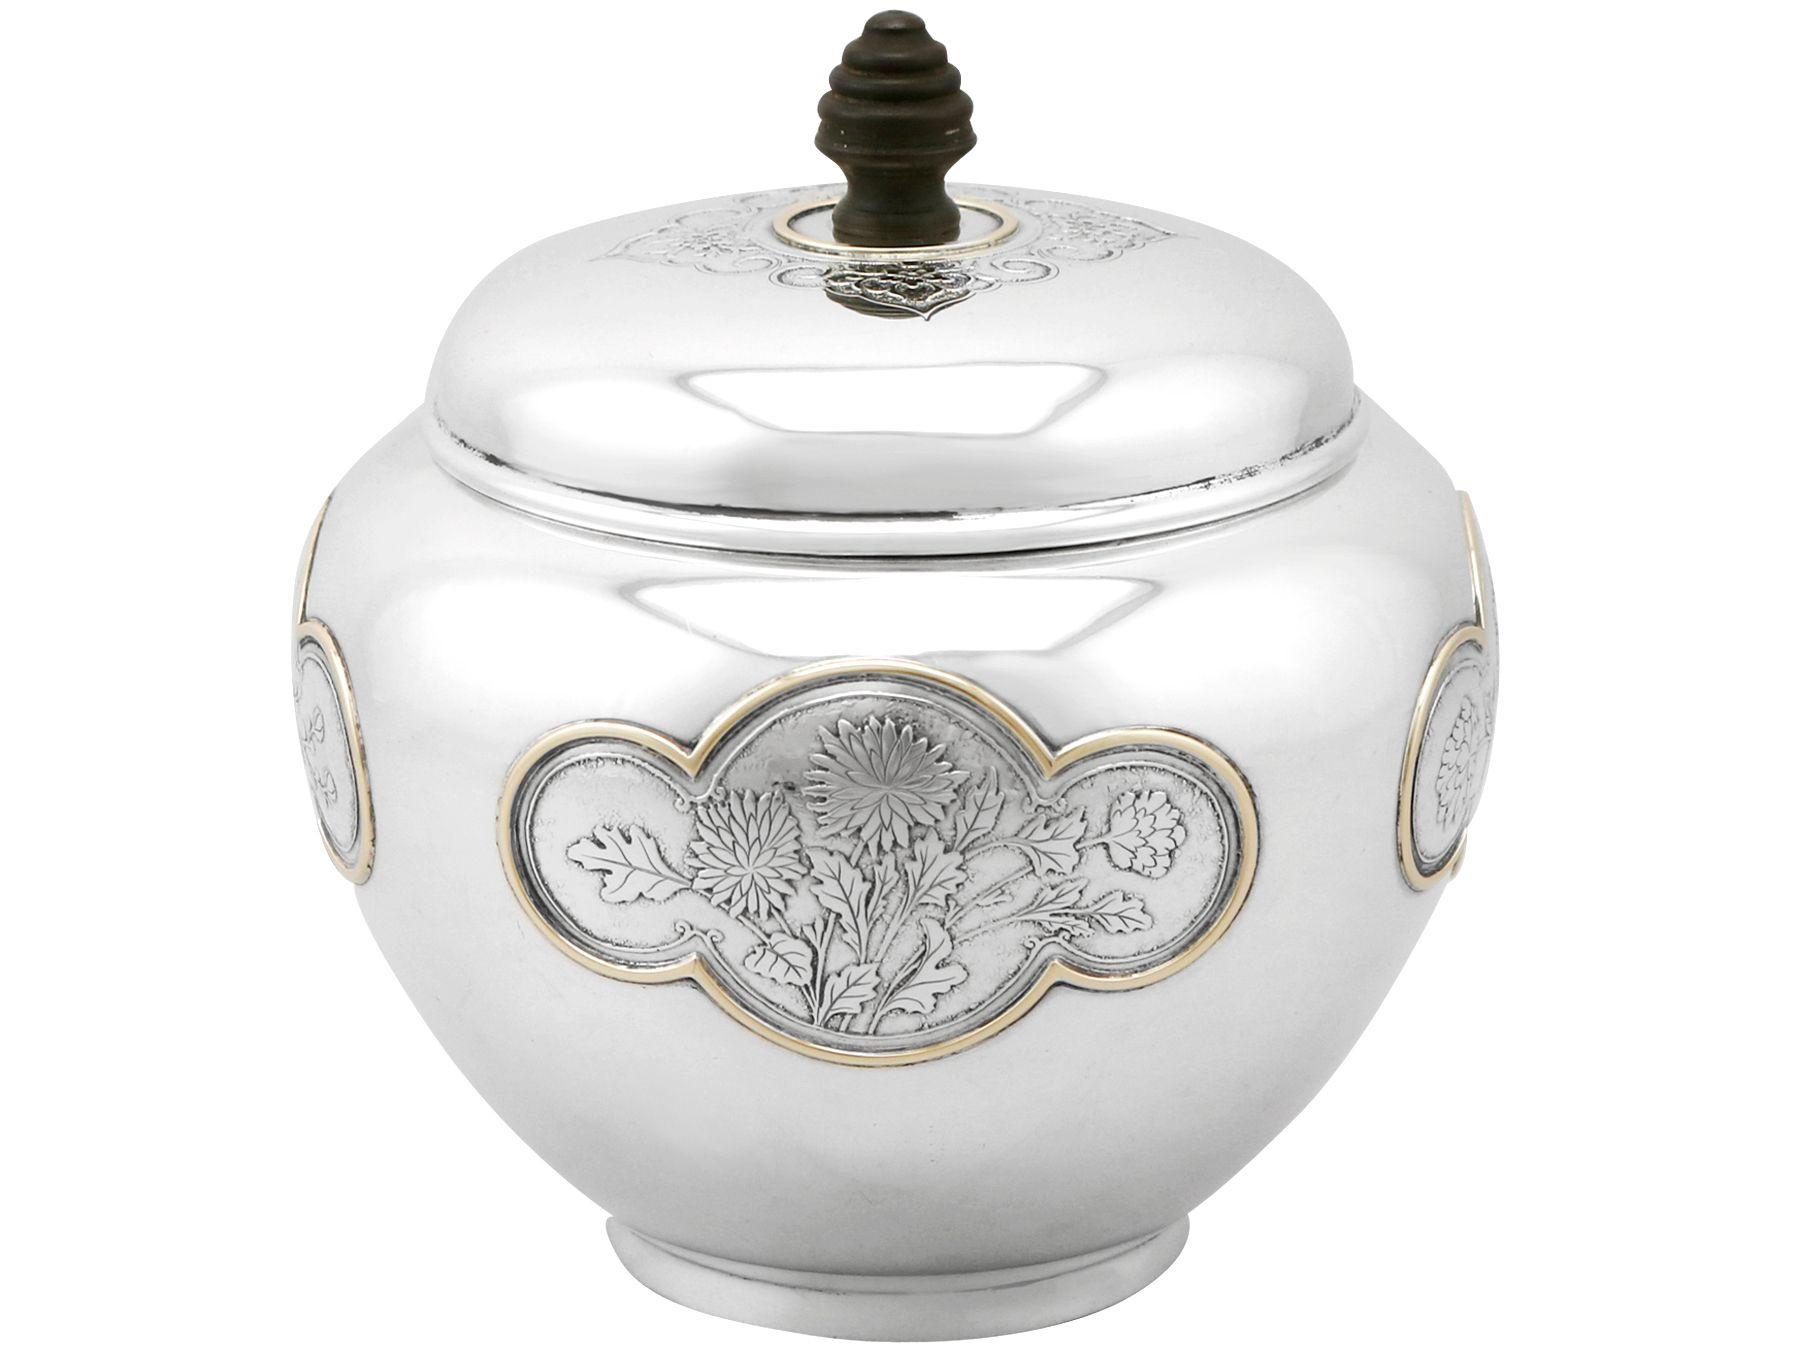 An exceptional, fine and impressive antique American sterling silver and 14 karat gold biscuit box; an addition to our diverse silver box collection

This exceptional antique American sterling silver biscuit box has a circular rounded form to a